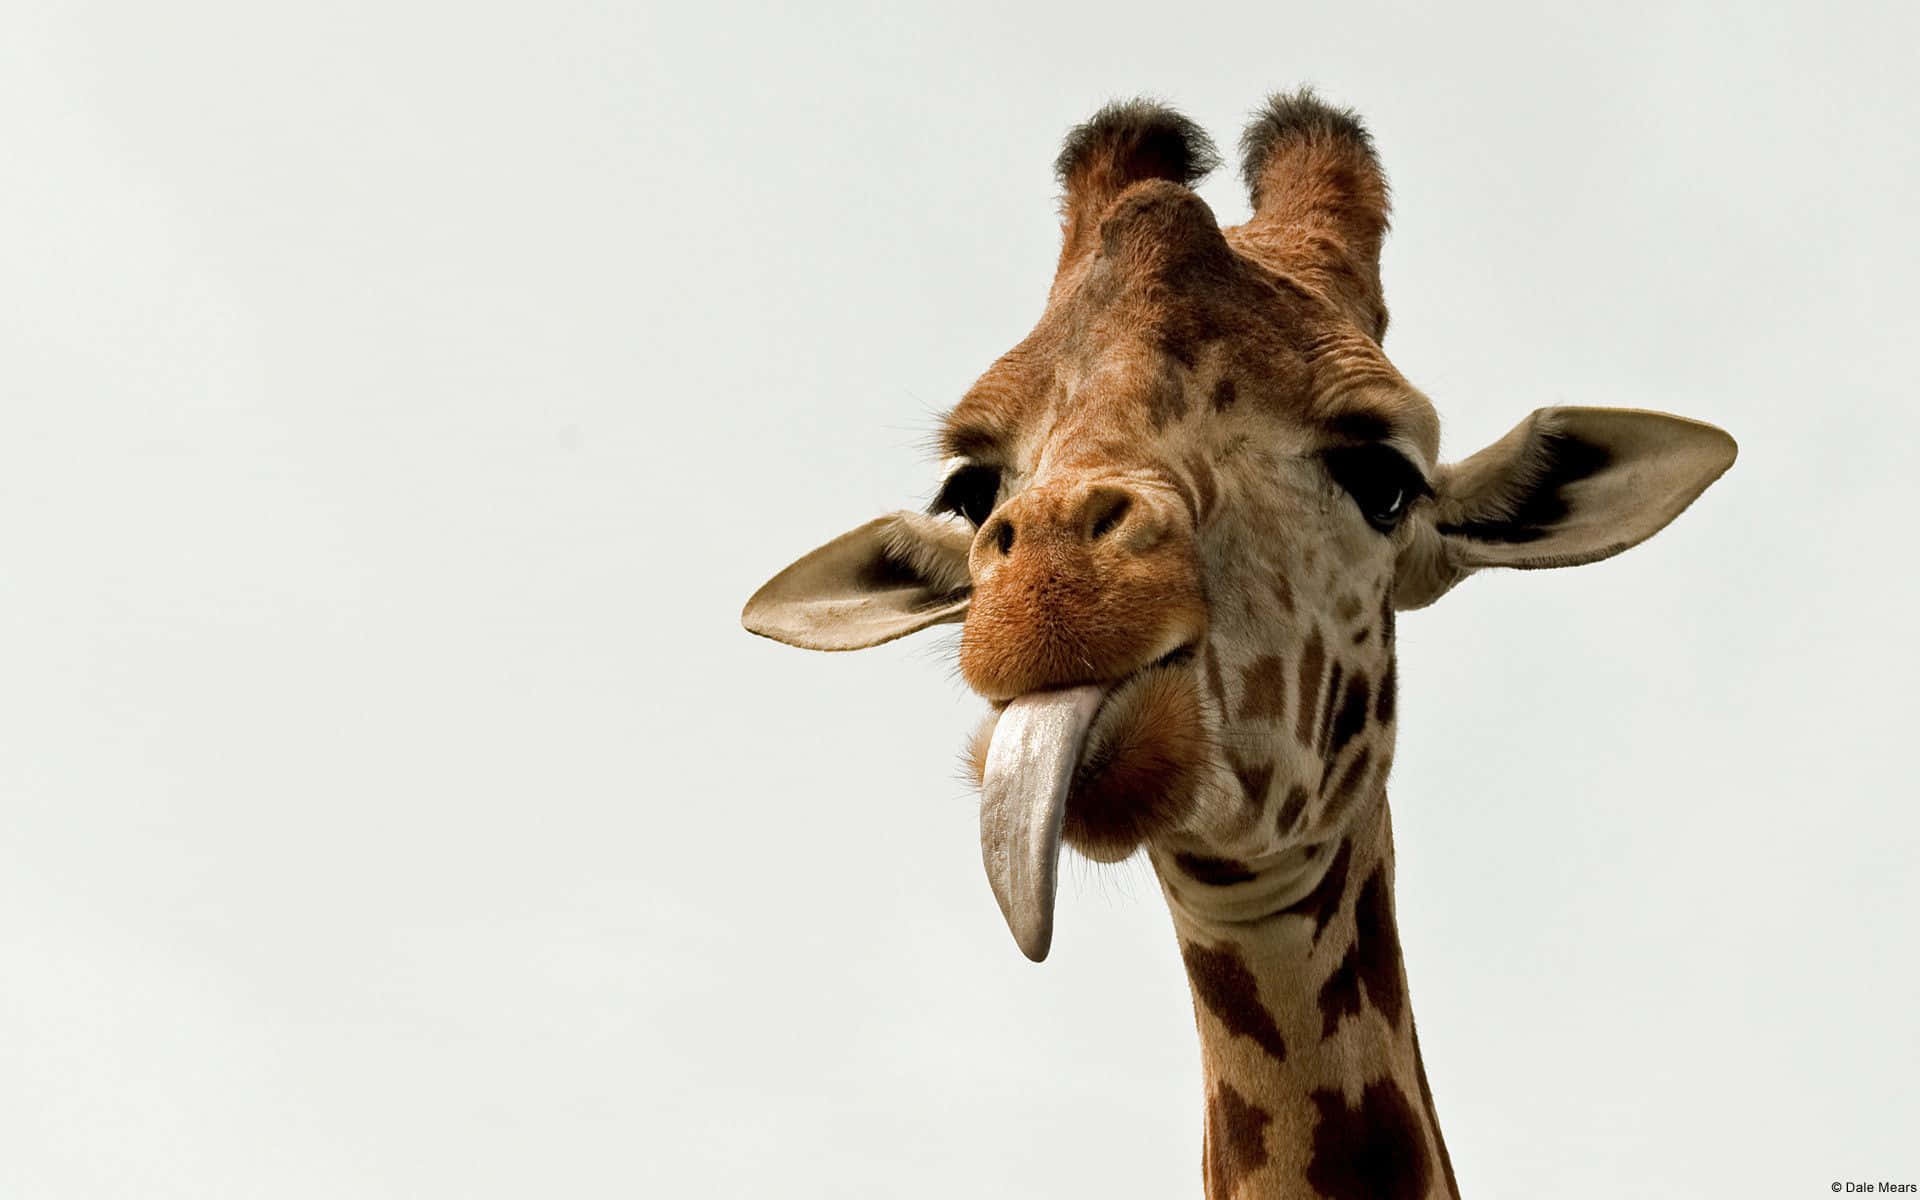 Cute Giraffe Sticking Tongue Out Picture